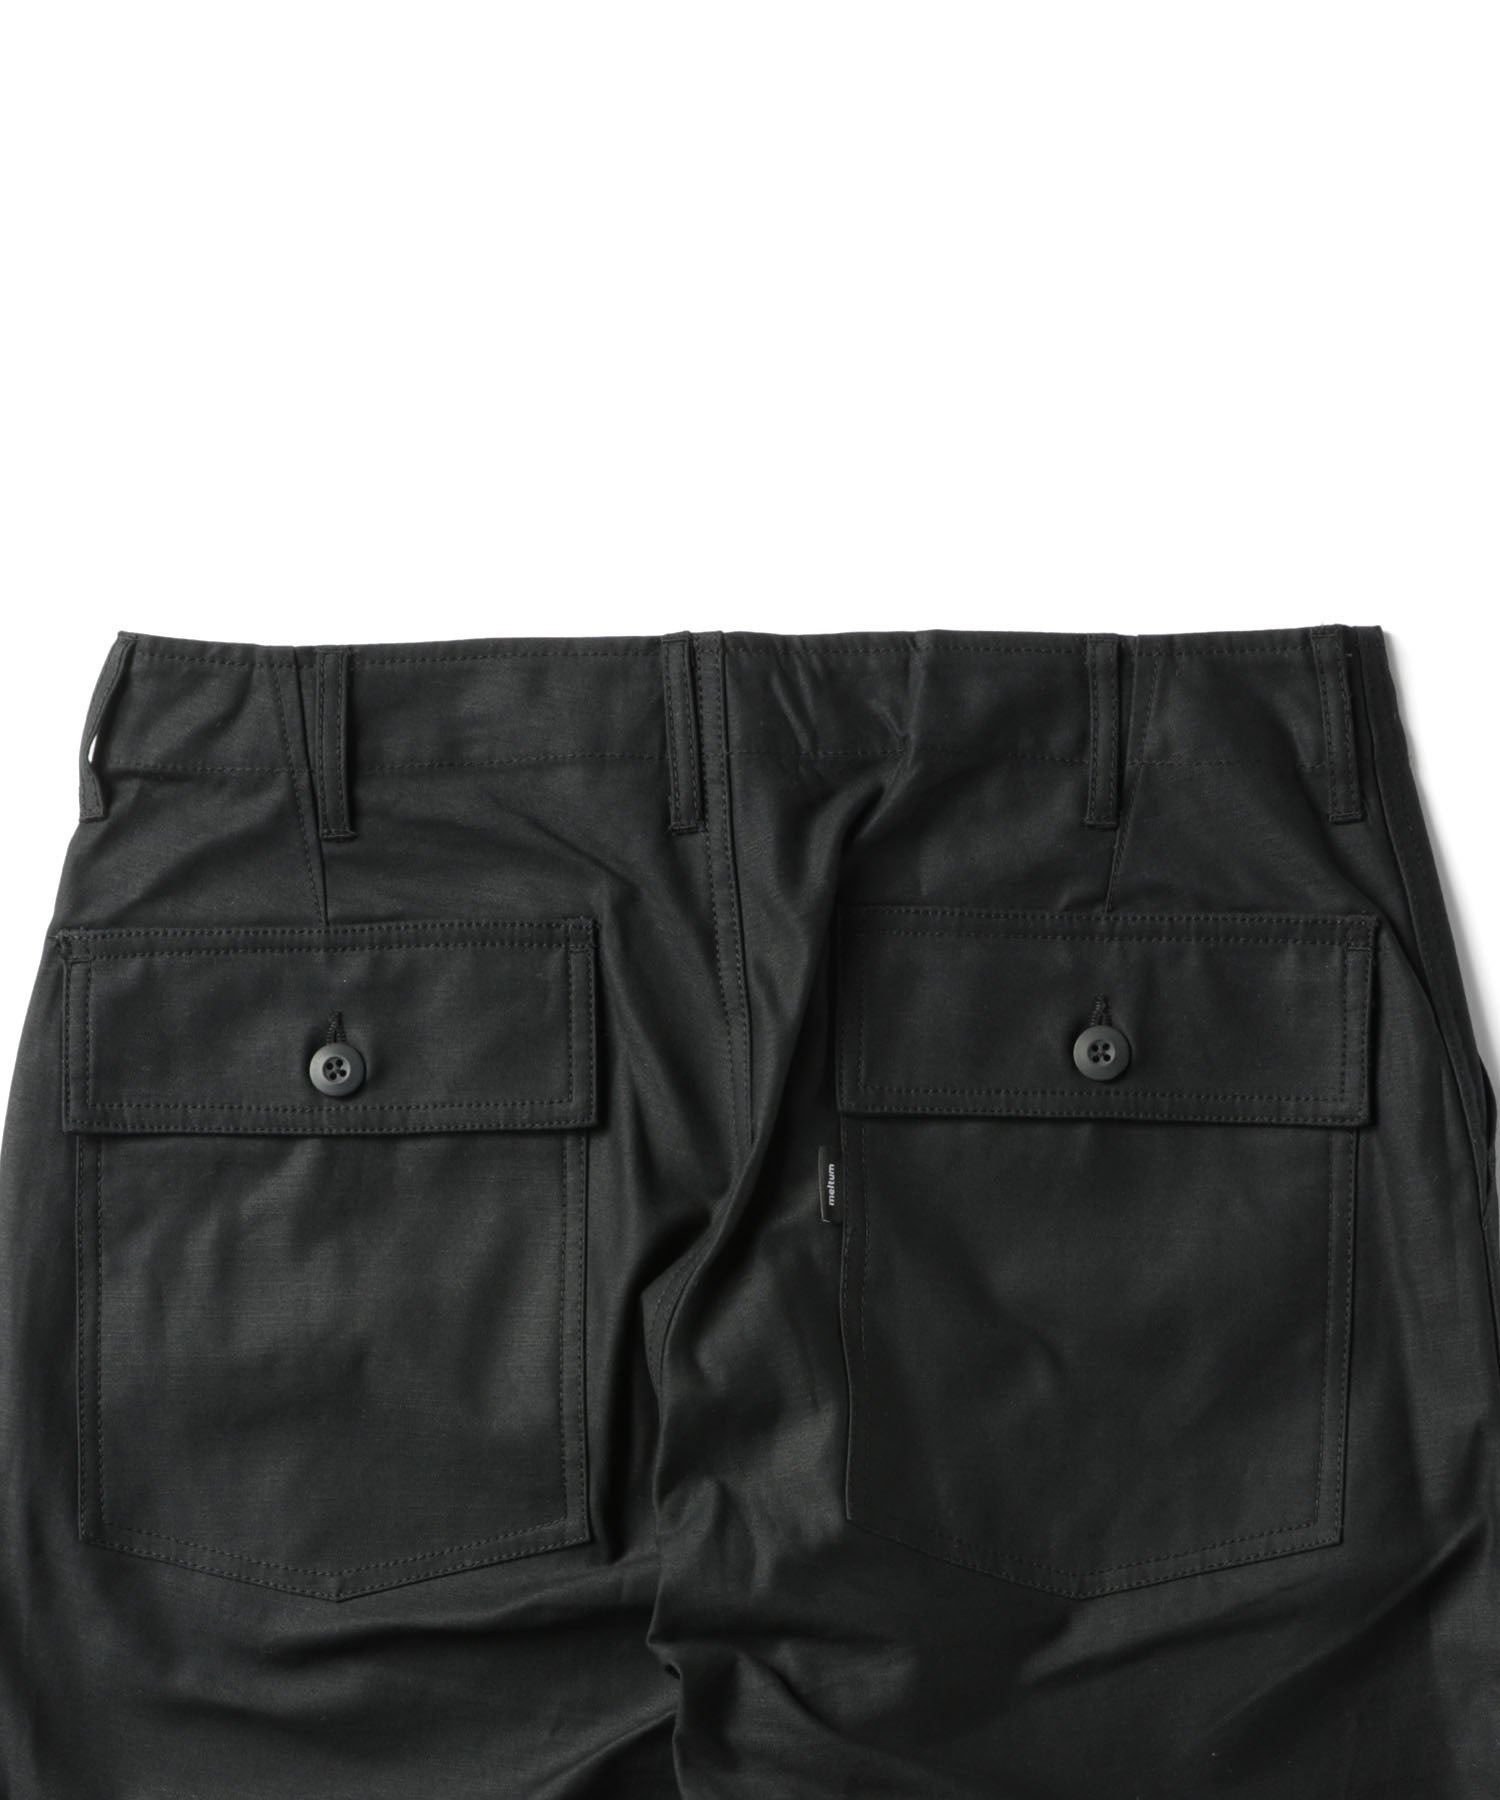 UTILITY TROUSERS